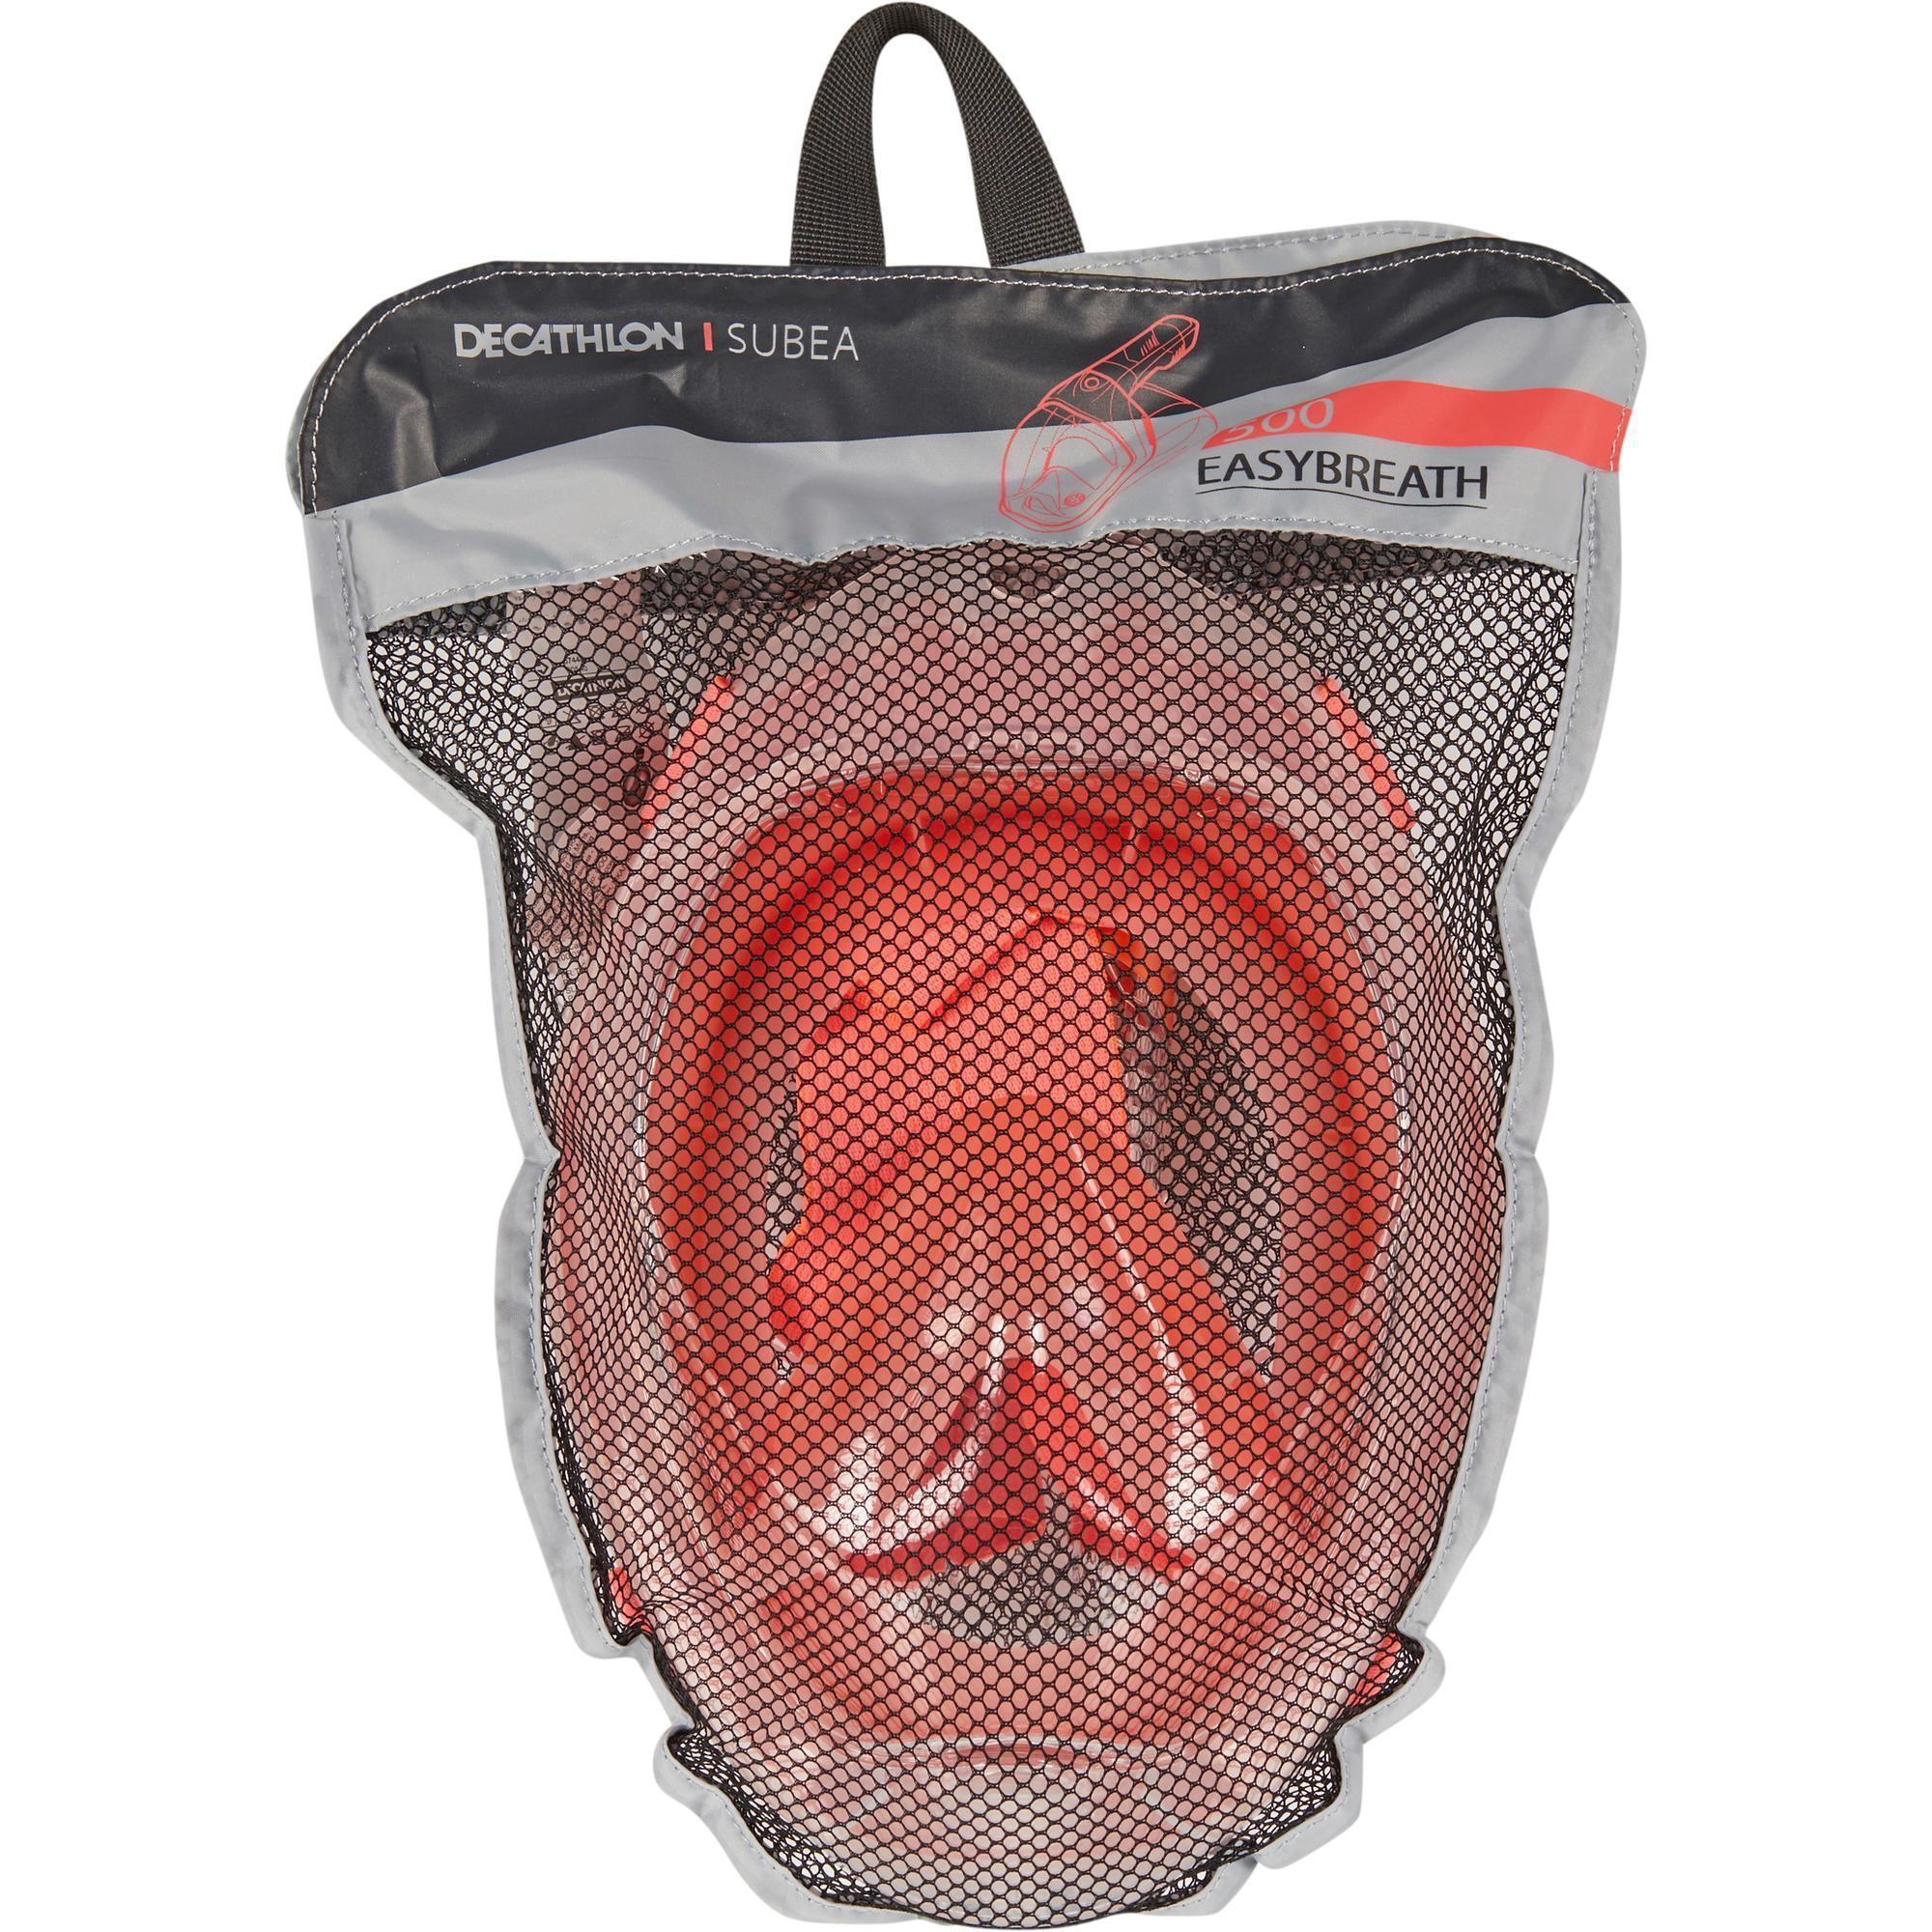 Adult’s Easybreath Surface Mask - 500 Coral with bag 8/9